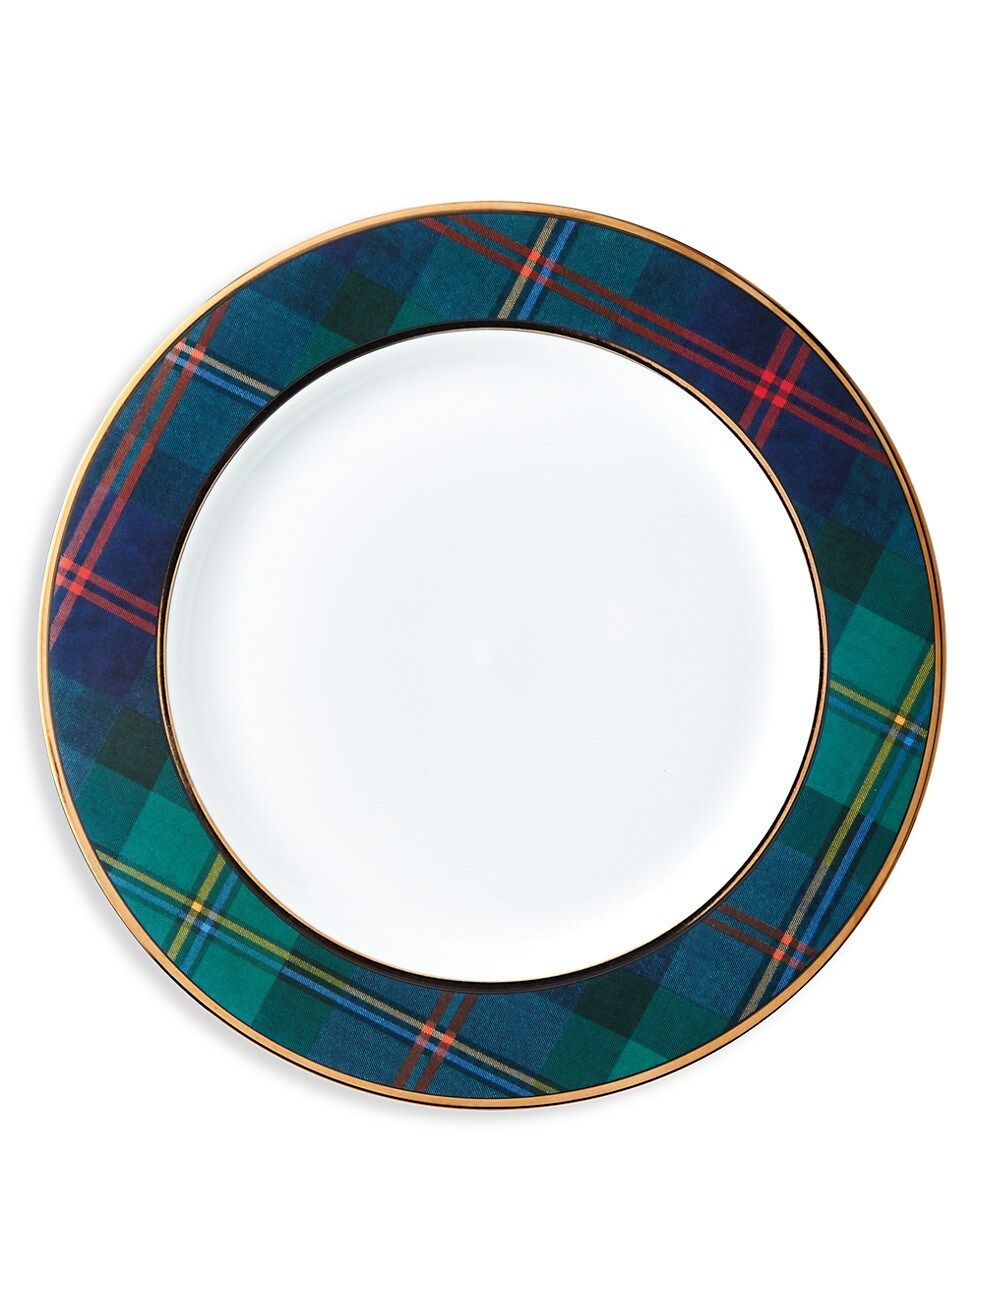 Wexford Dinner Plate | Saks Fifth Avenue